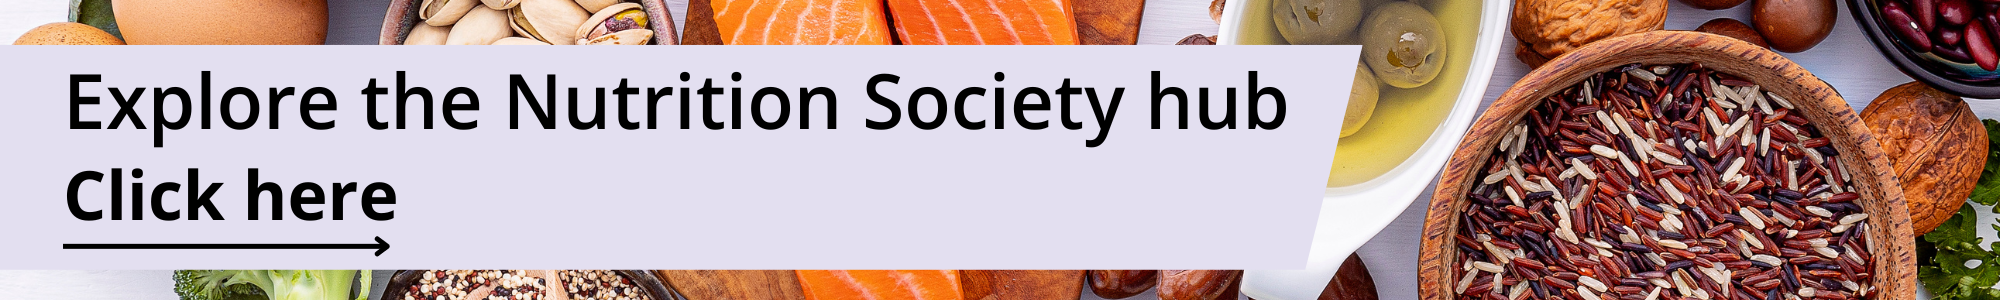 Explore the Nutrition Society Hub Core Banner